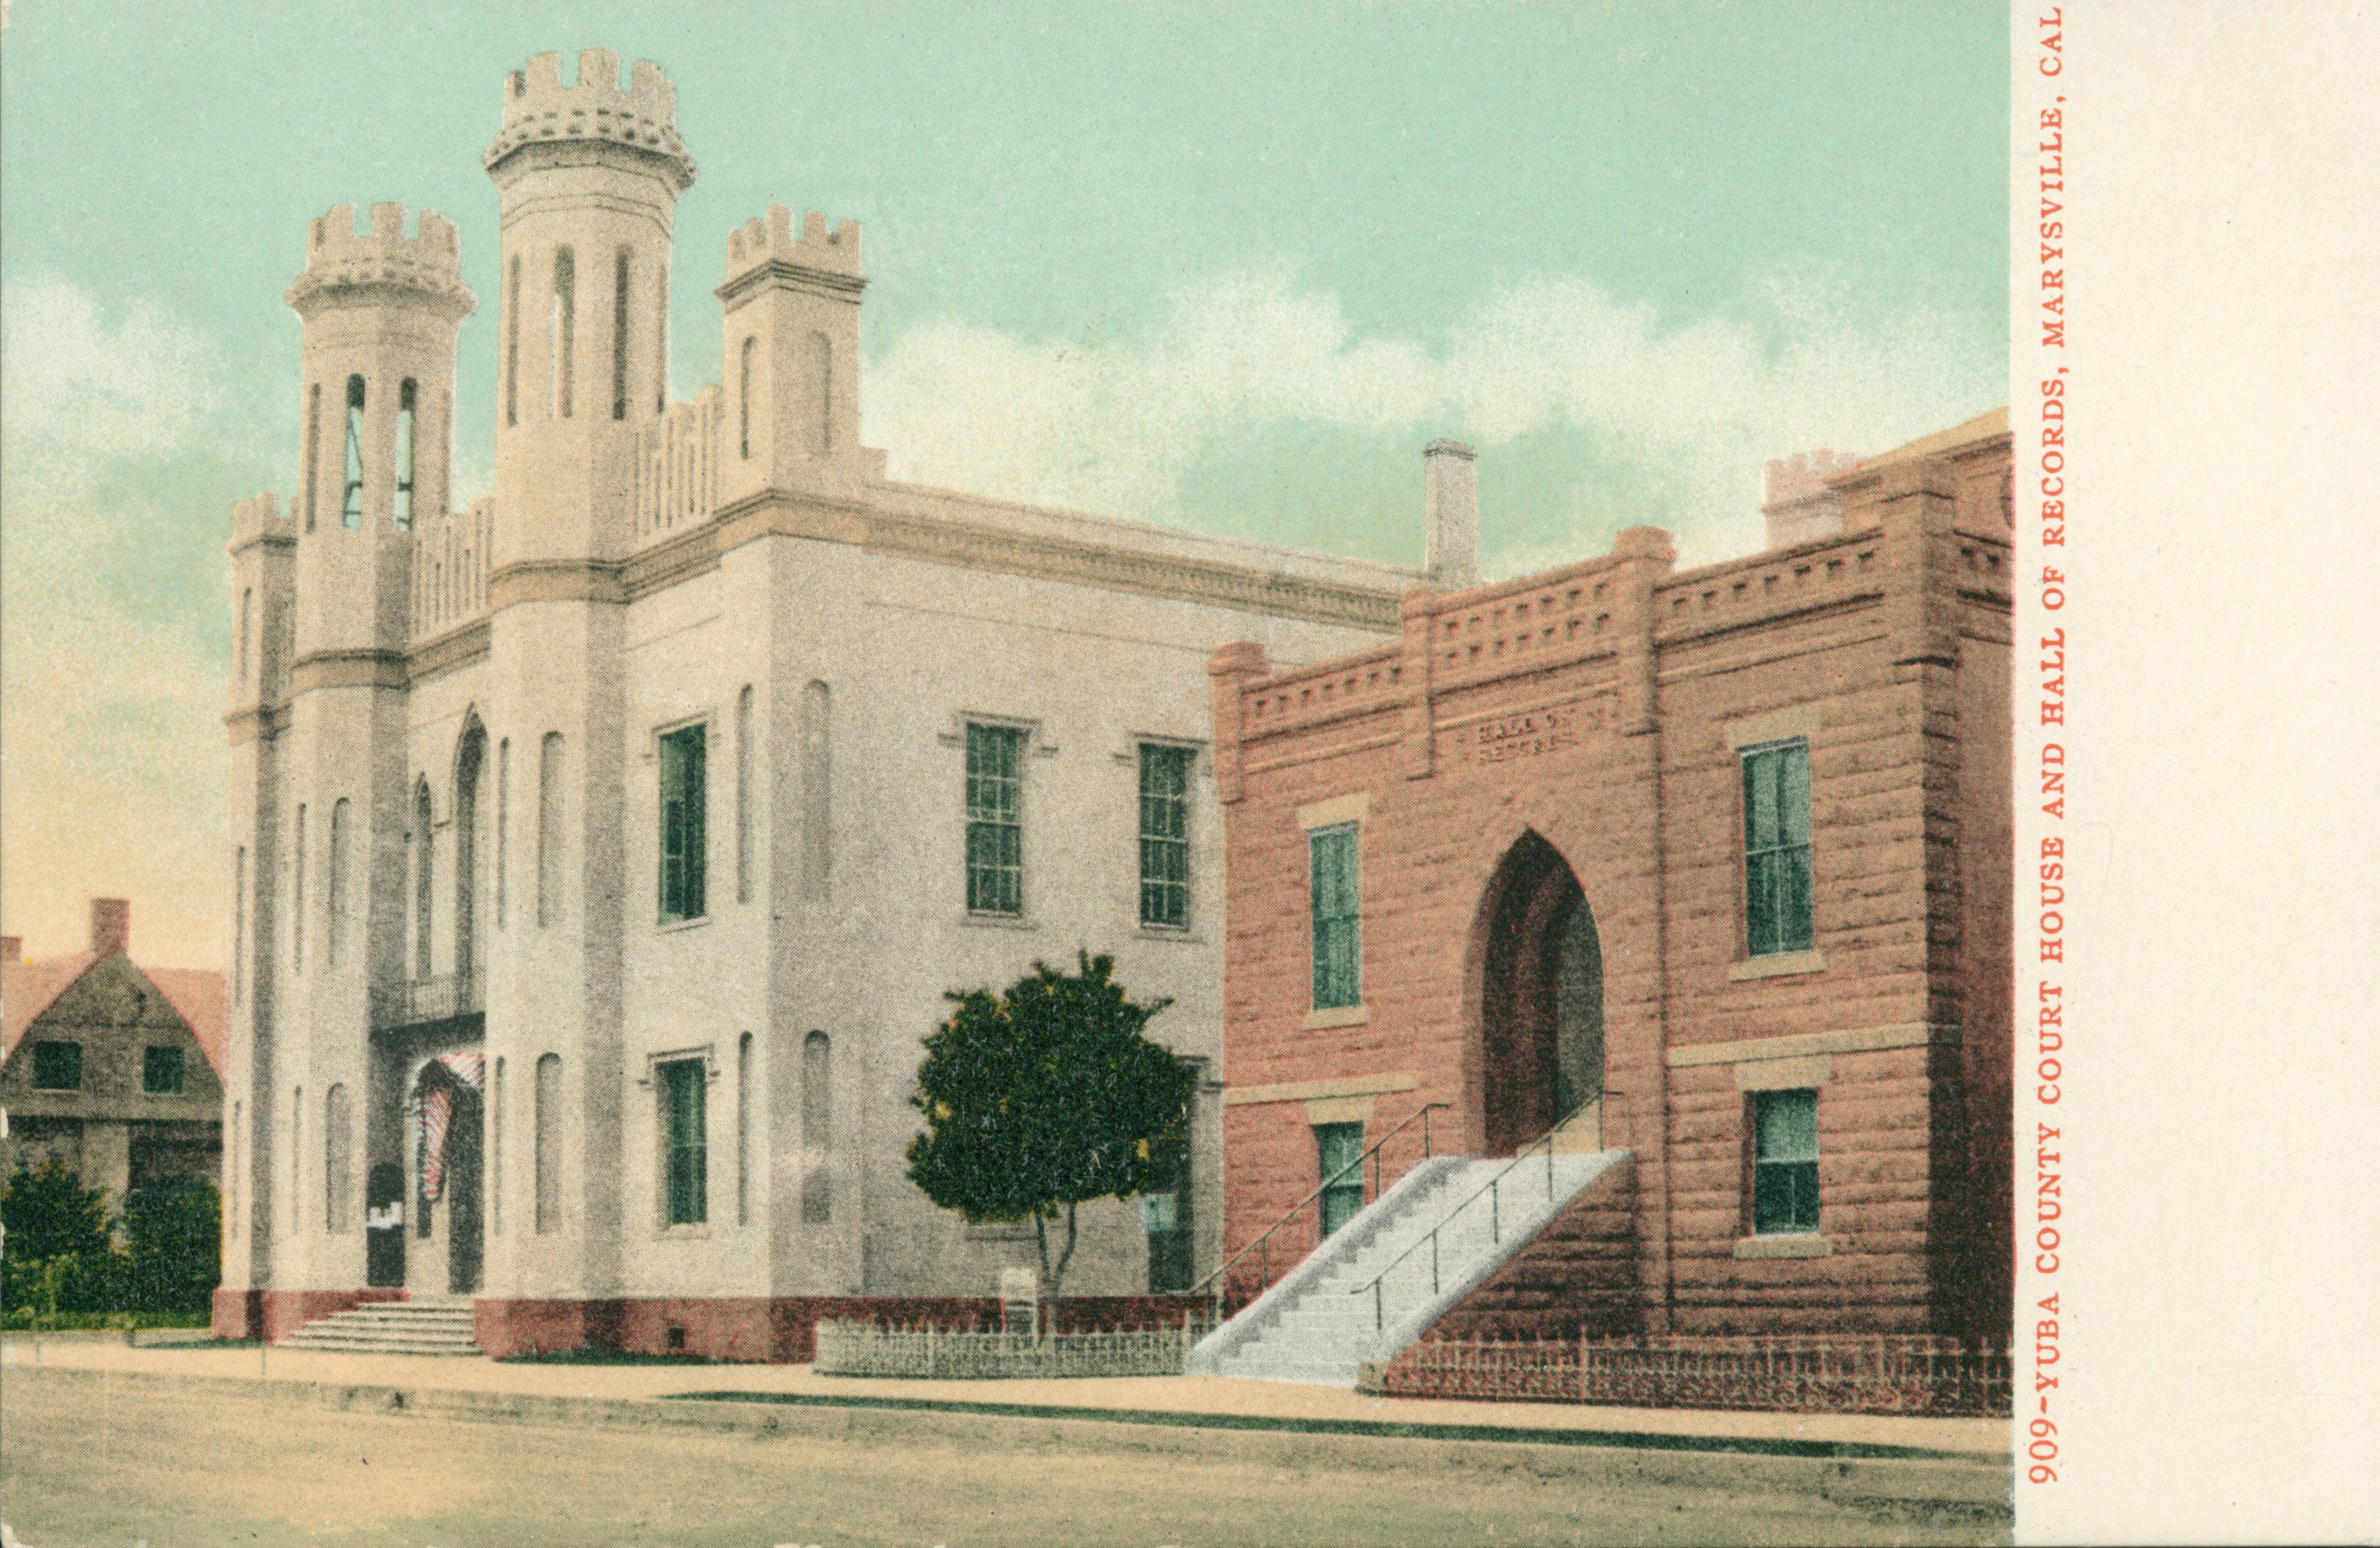 Shows a street view of the Yuba County court house